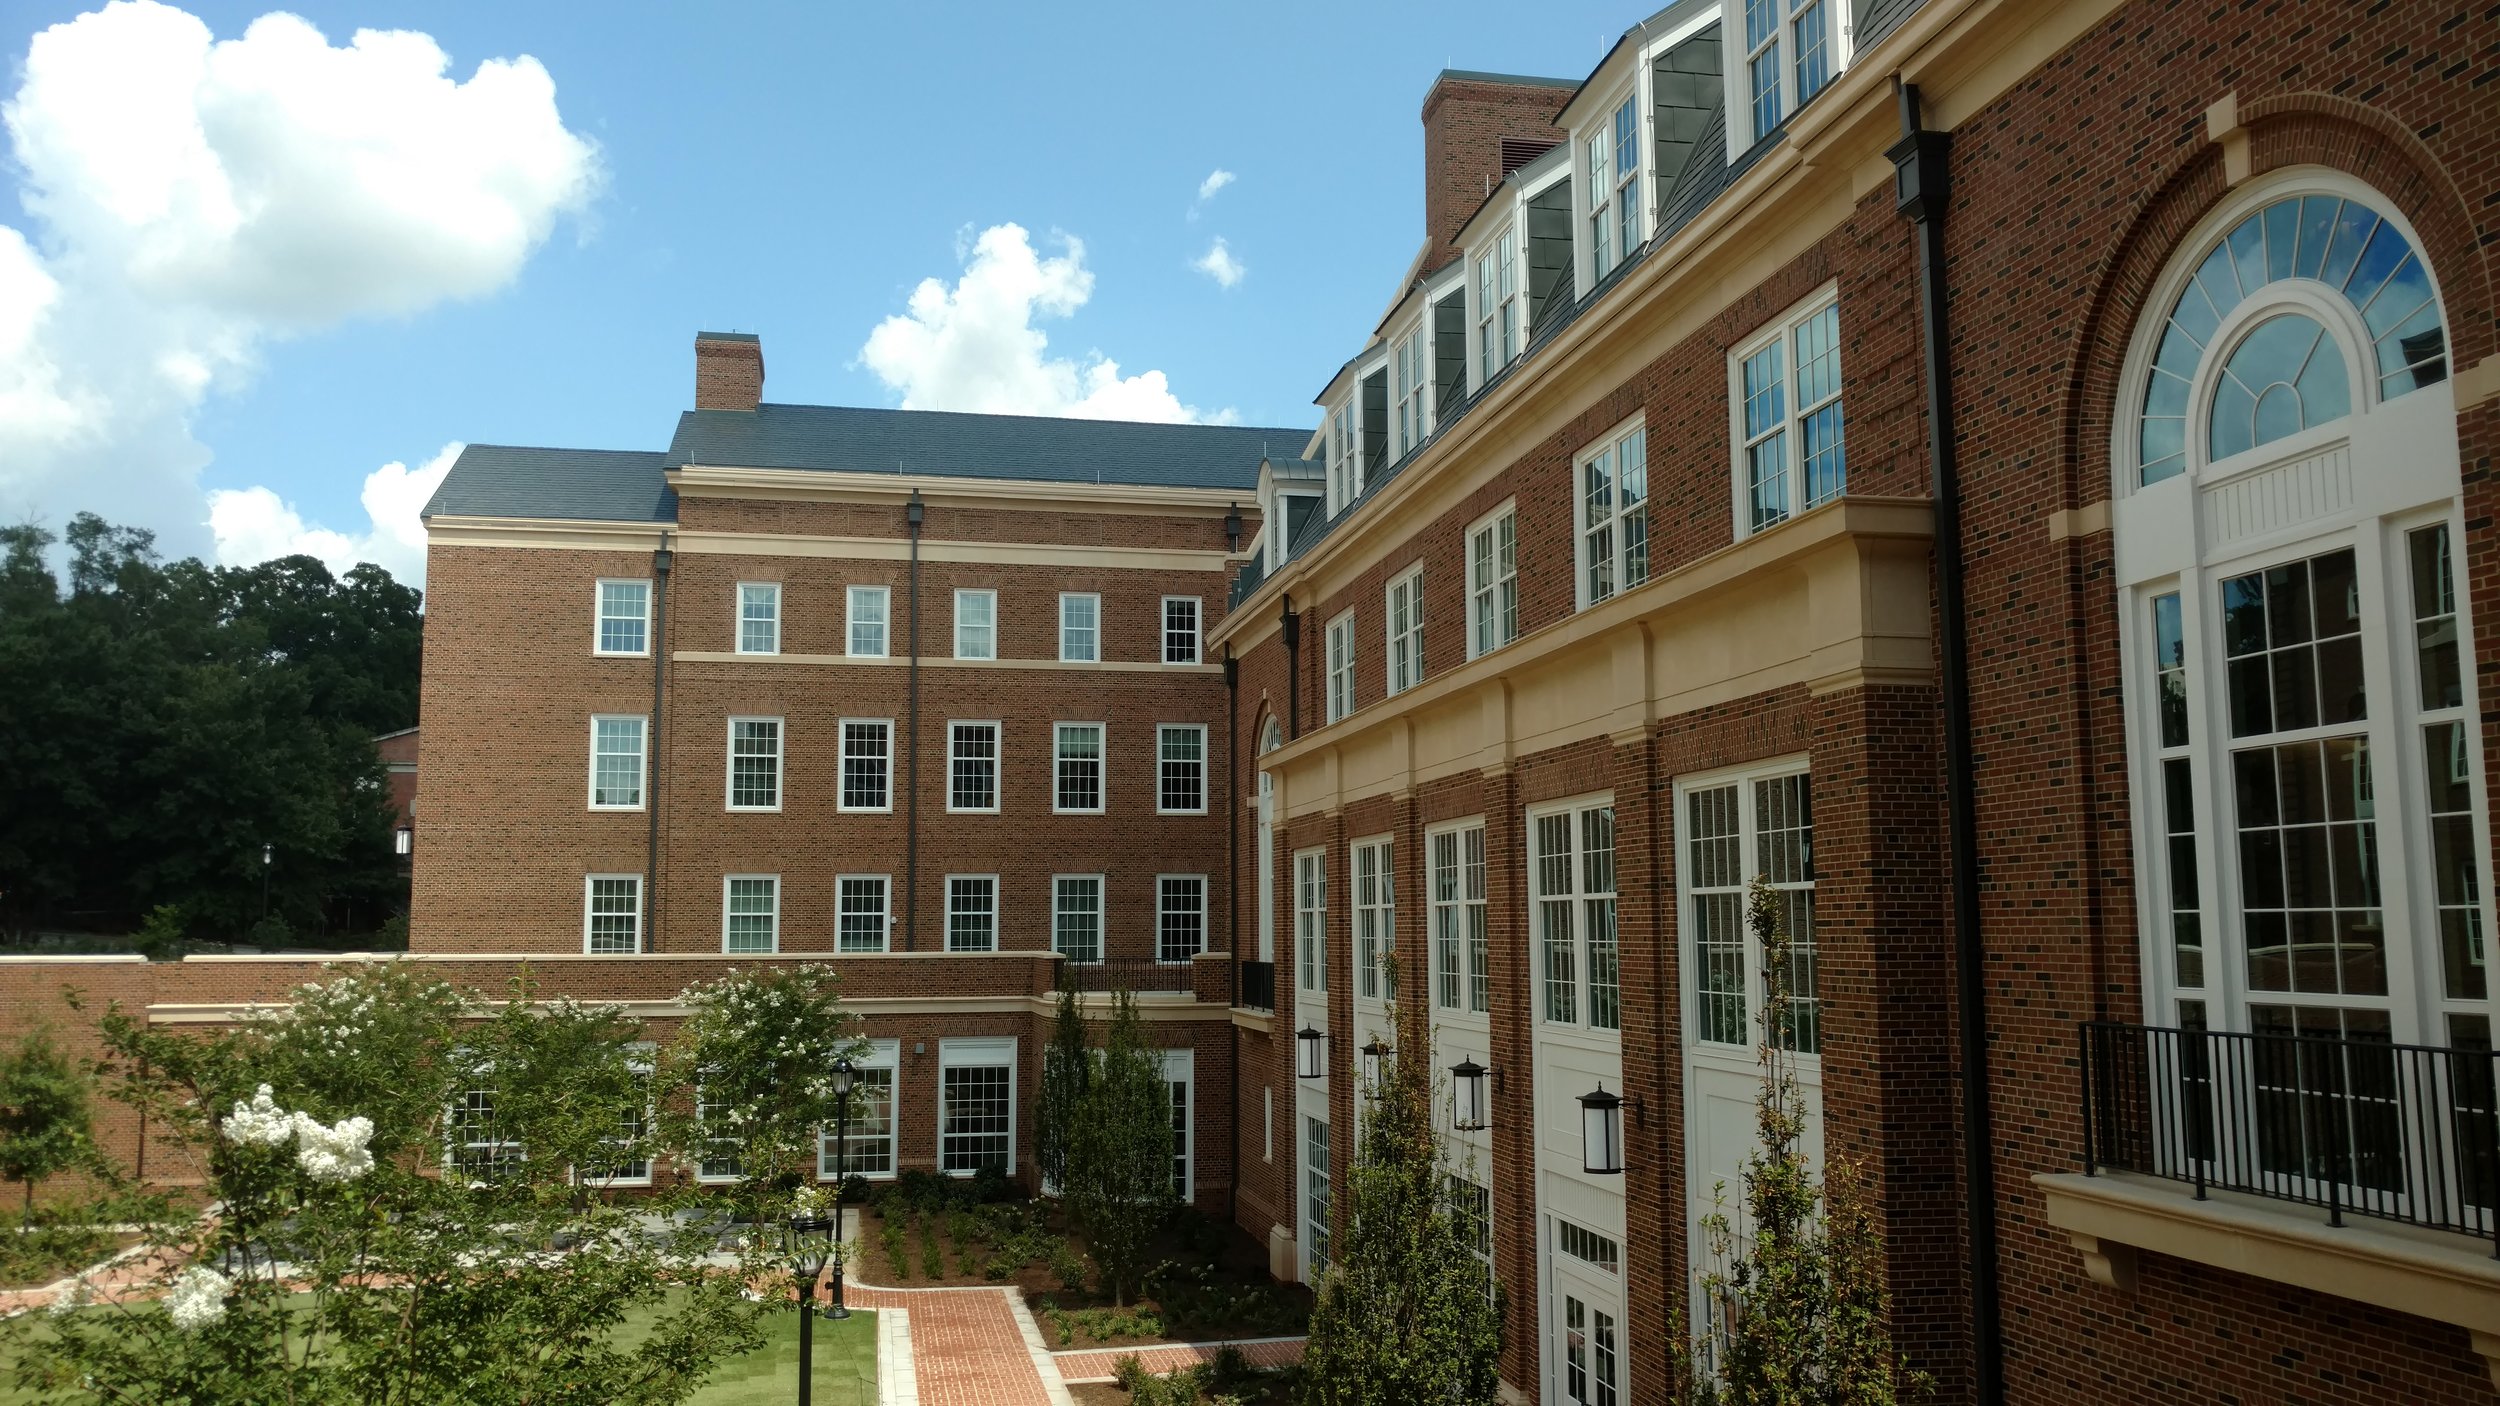 The University of Georgia Business Learning Center